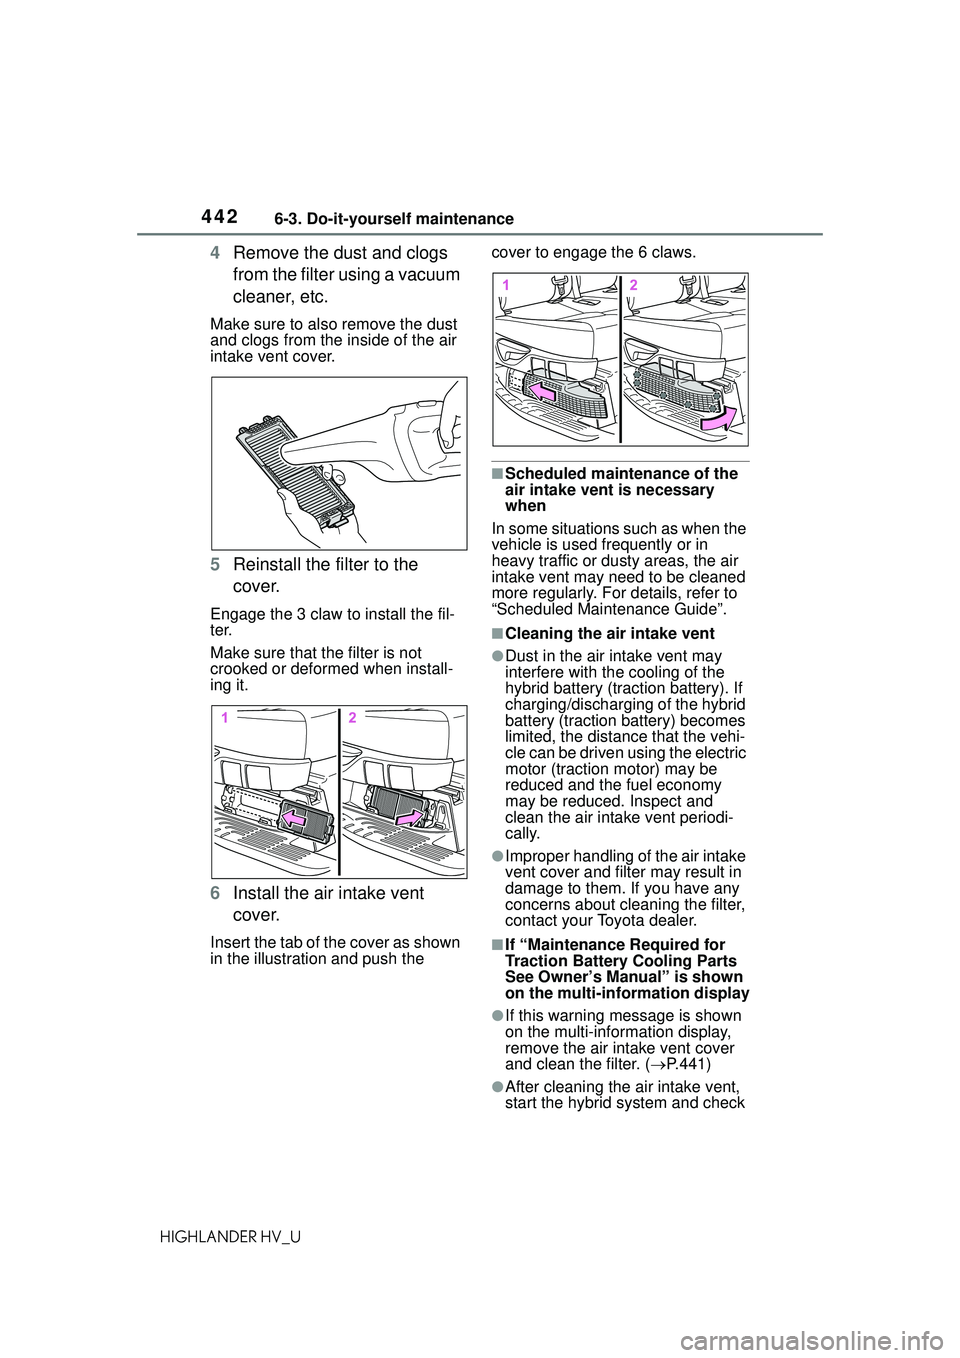 TOYOTA HIGHLANDER HYBRID 2021  Owners Manual (in English) 4426-3. Do-it-yourself maintenance
HIGHLANDER HV_U
4Remove the dust and clogs 
from the filter using a vacuum 
cleaner, etc.
Make sure to also remove the dust 
and clogs from the inside of the air 
in